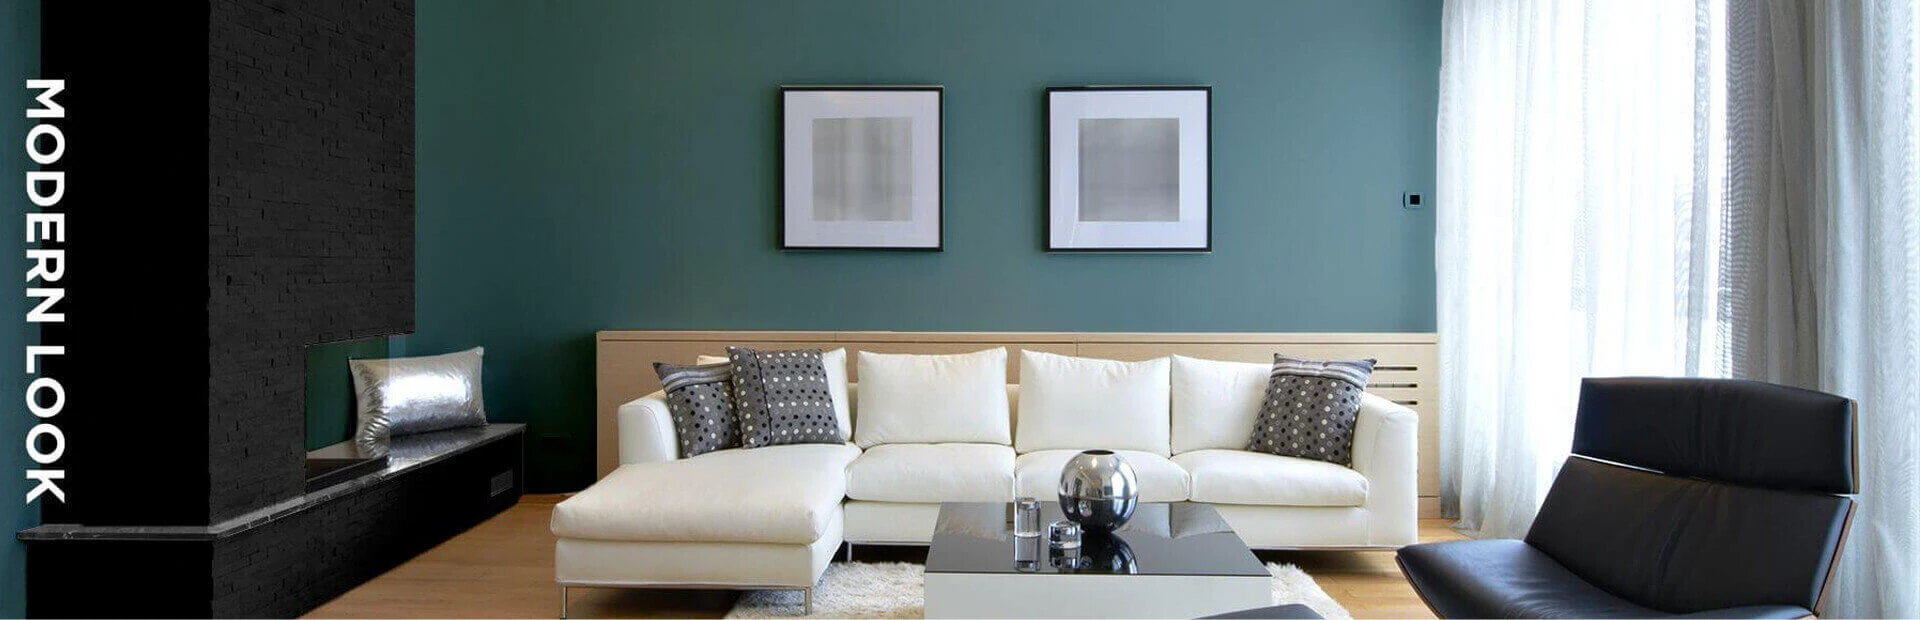 Modern living with green and black painted walls and a beige sofa